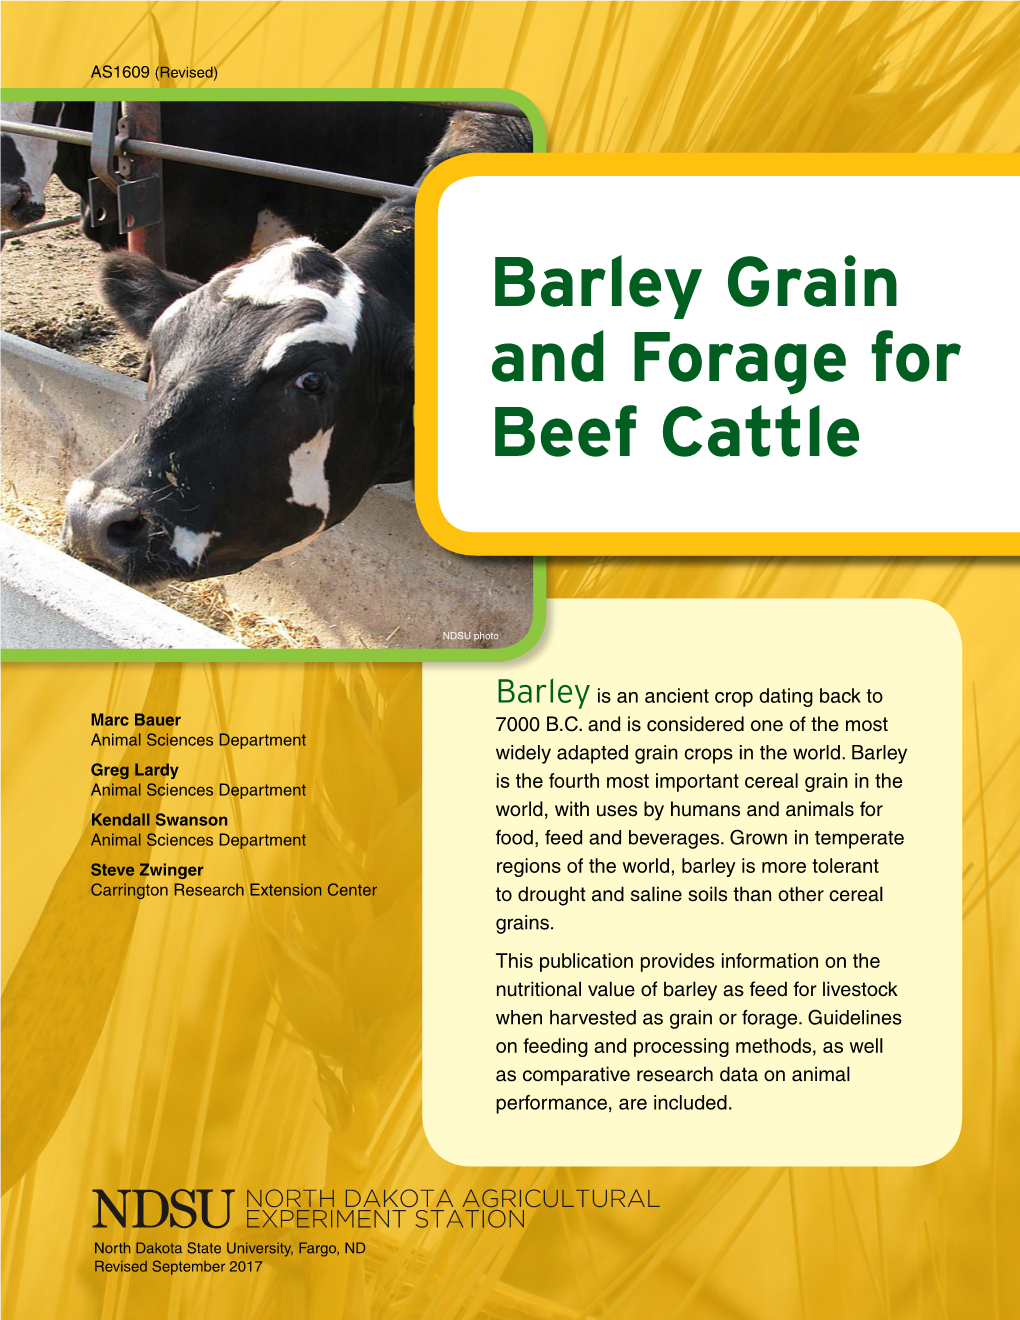 Barley Grain and Forage for Beef Cattle (AS1609)